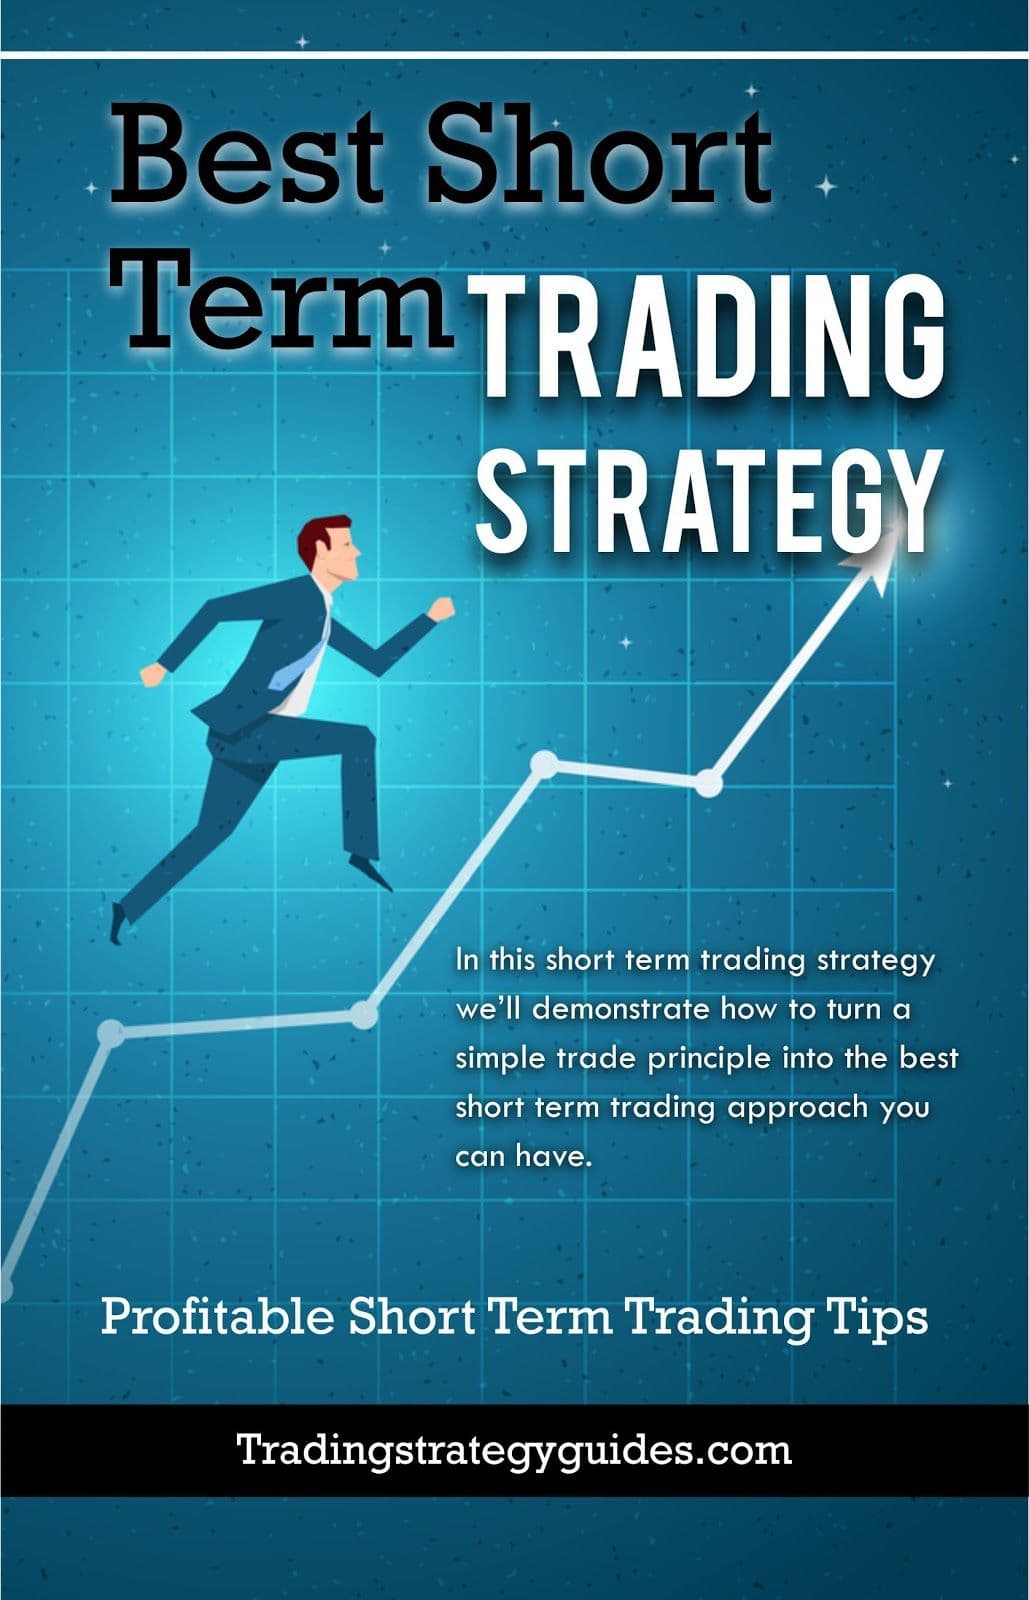 Best Short Term Trading Strategy